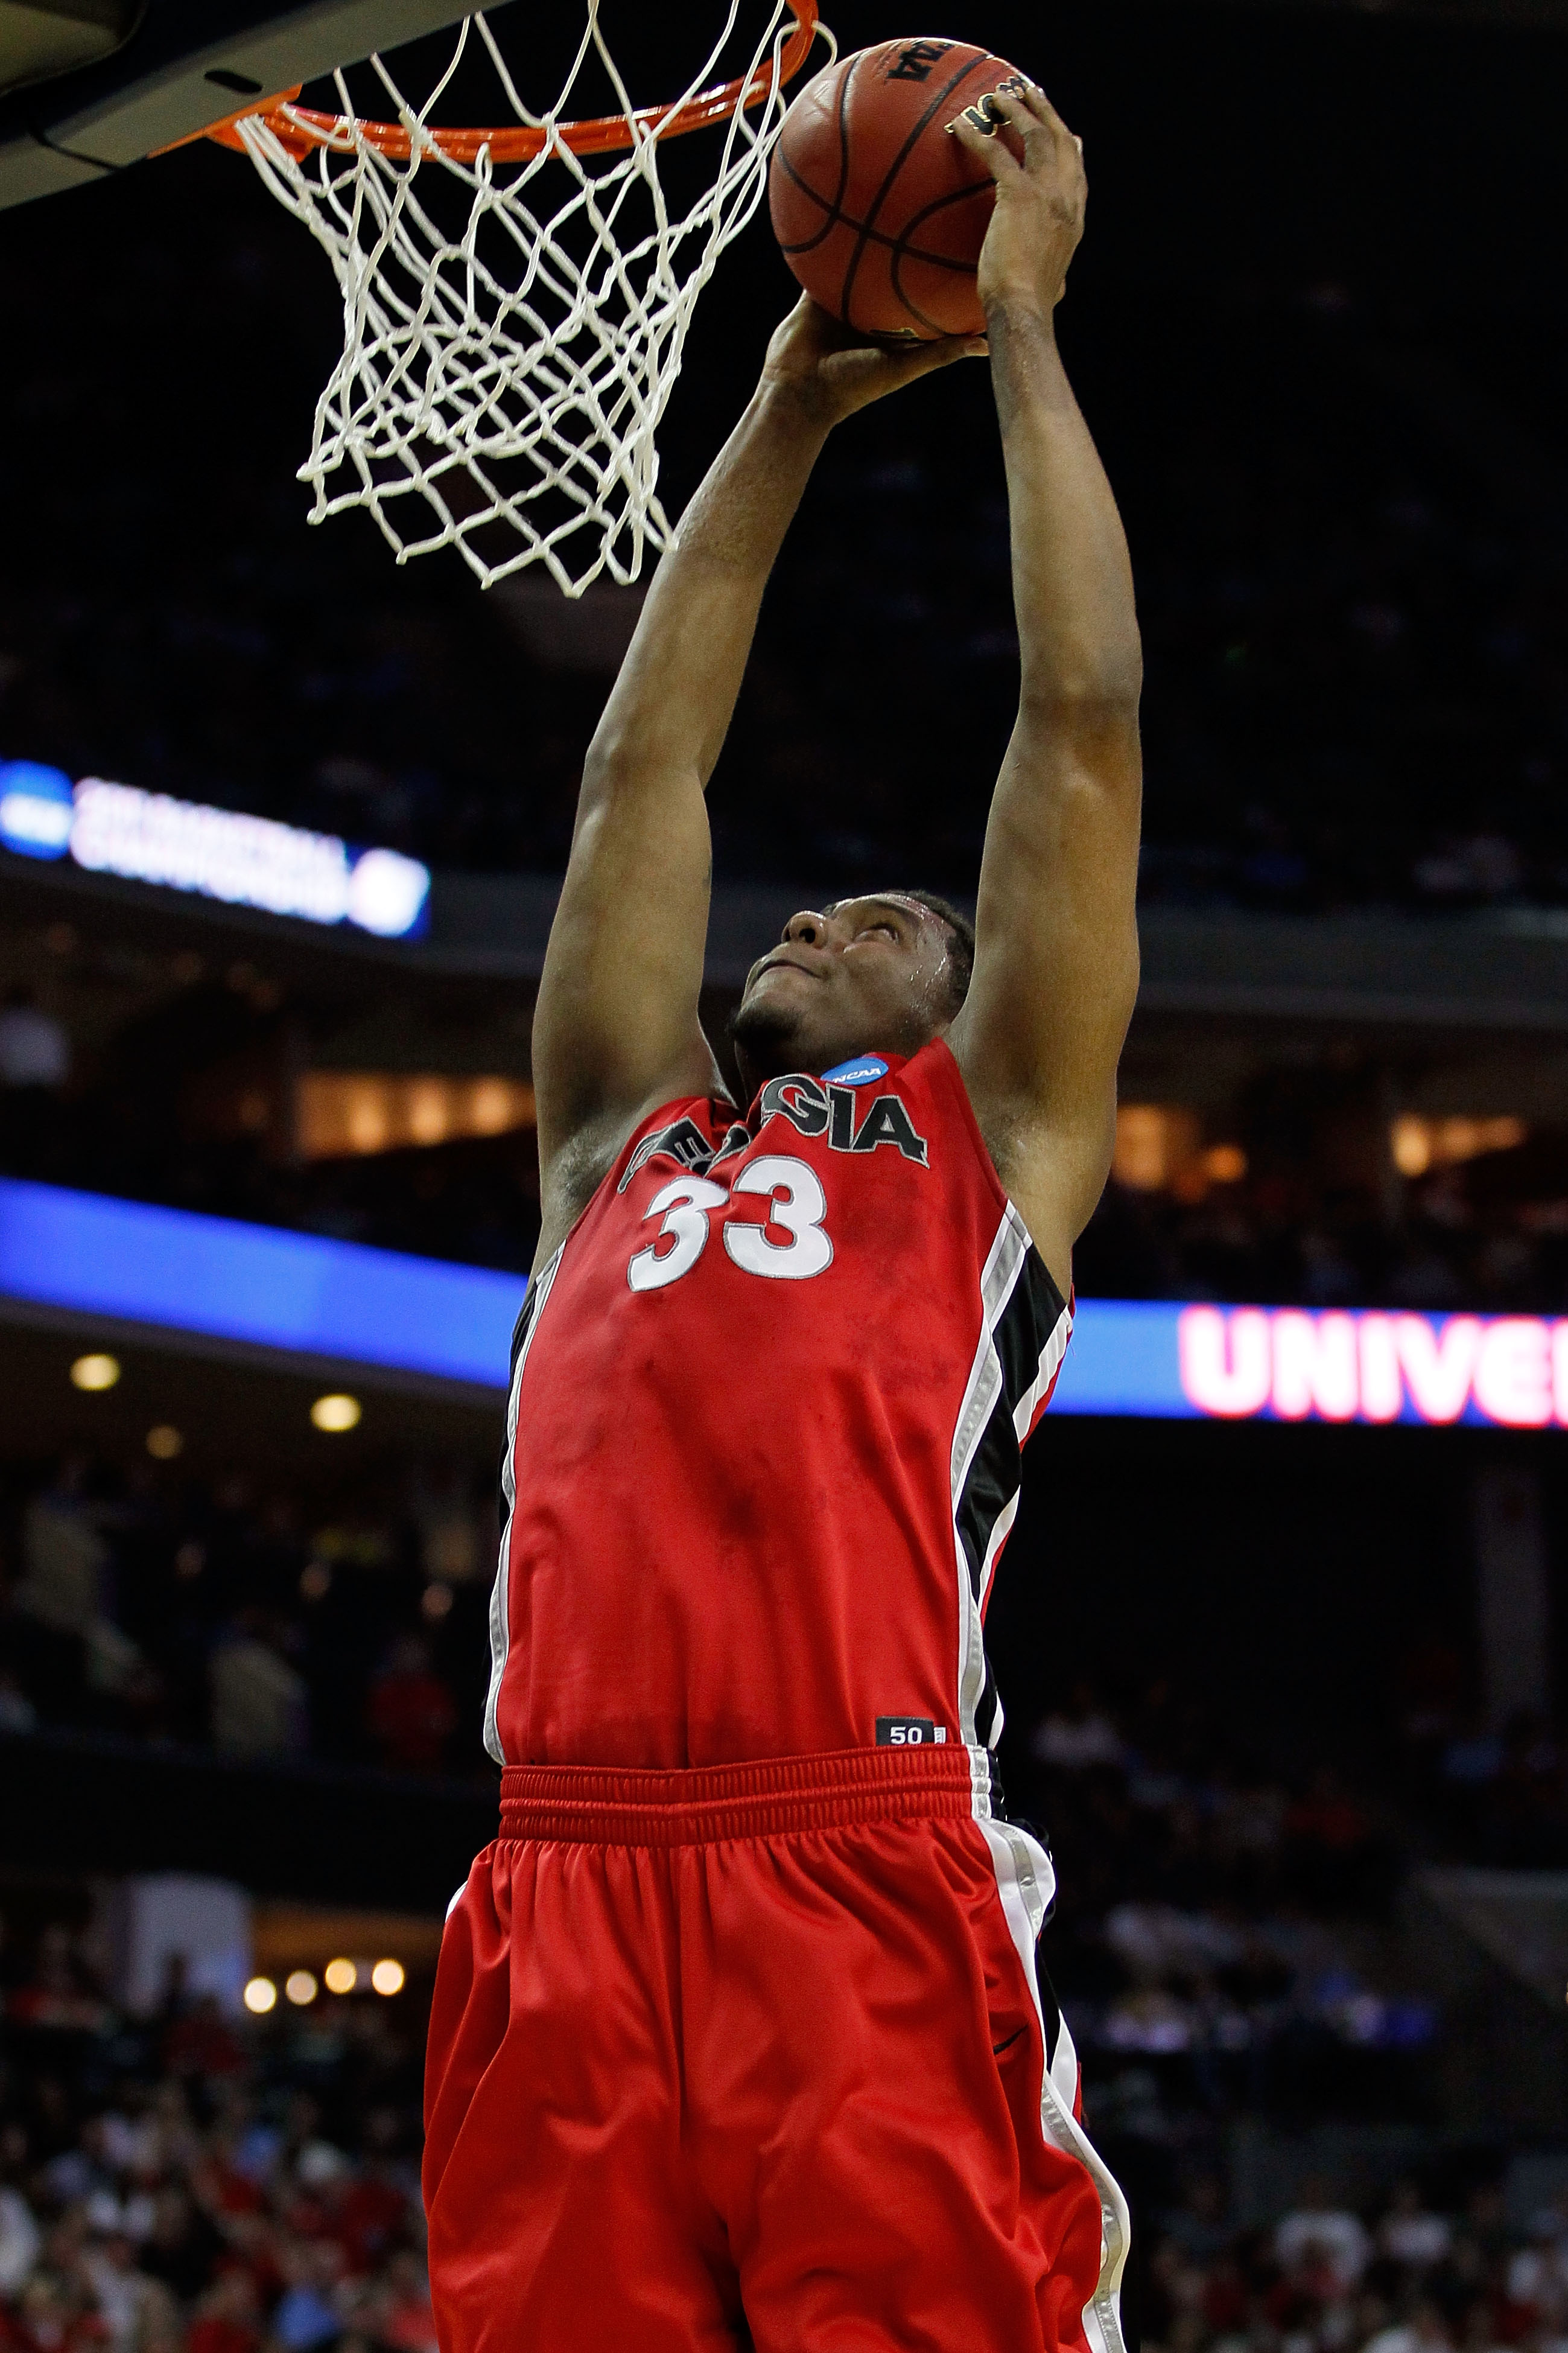 CHARLOTTE, NC - MARCH 18:  Trey Thompkins #33 of the Georgia Bulldogs dunks the ball in the first half while taking on the Washington Huskies during the second round of the 2011 NCAA men's basketball tournament at Time Warner Cable Arena on March 18, 2011